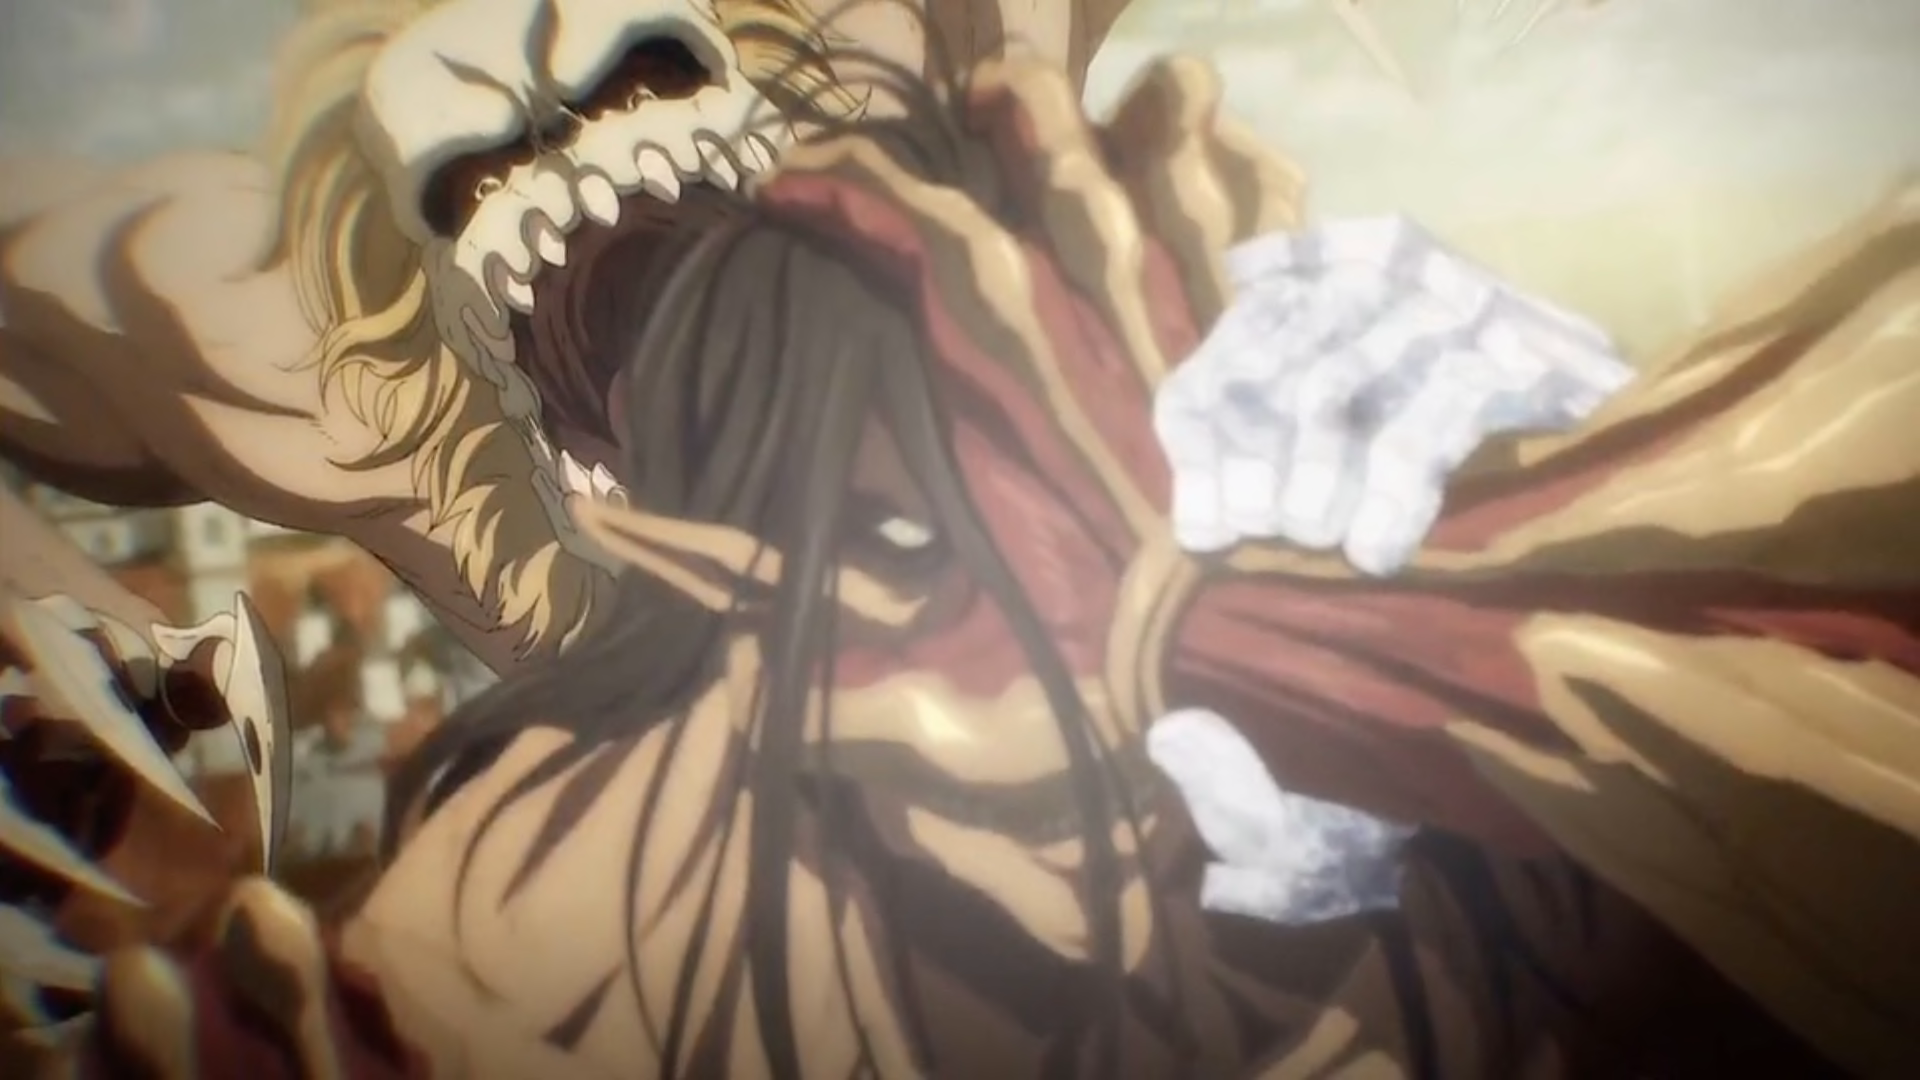 Attack on Titan on X: BREAKING NEWS: Attack on Titan Final Season Part 3  CONFIRMED to have 8 episodes, scheduled to begin airing in January 2023   / X